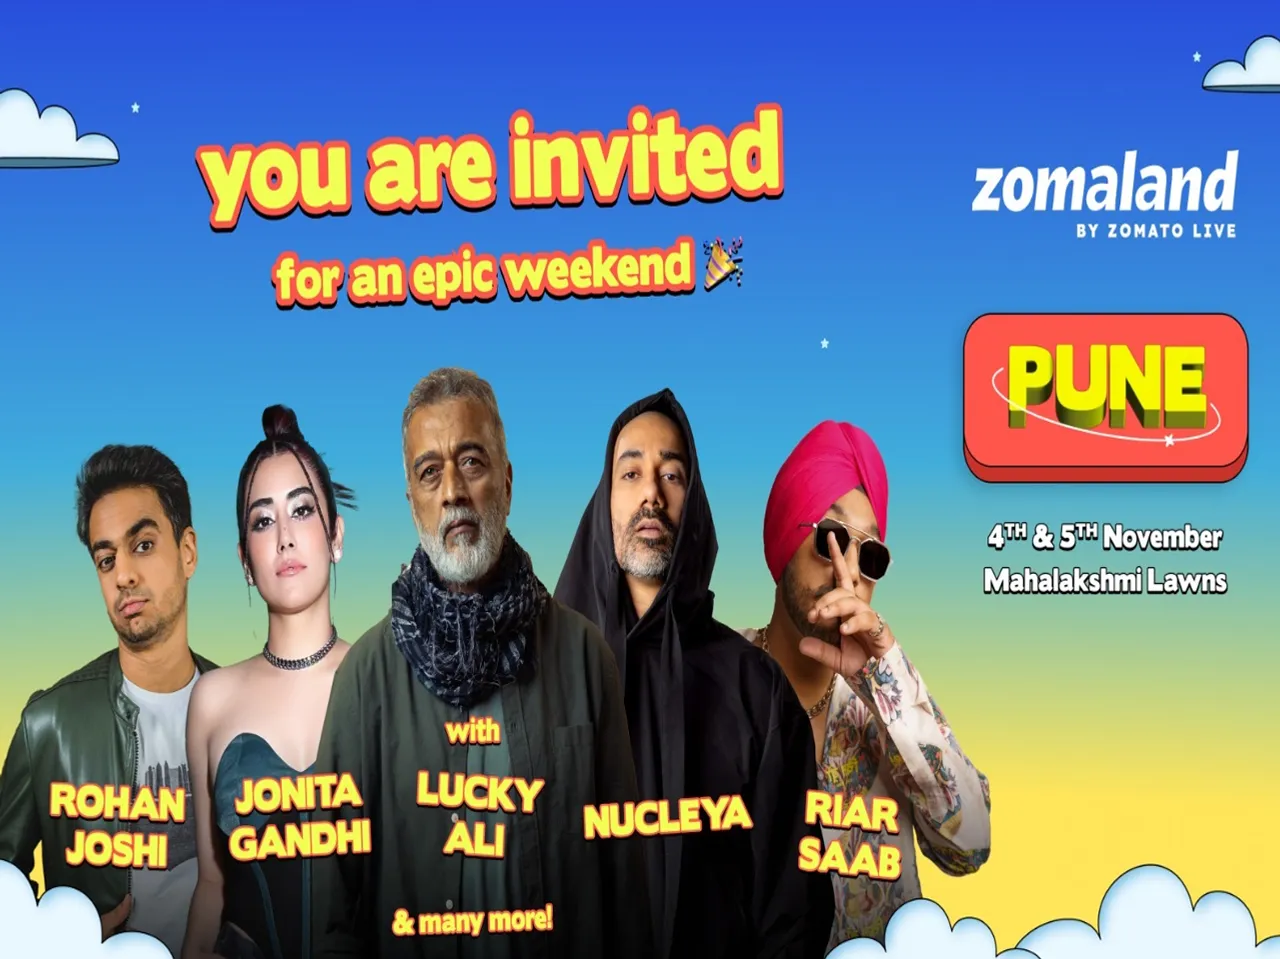 Zomaland Season 4 Is Back With A Banging Lineup For Punekars On 4th & 5th November